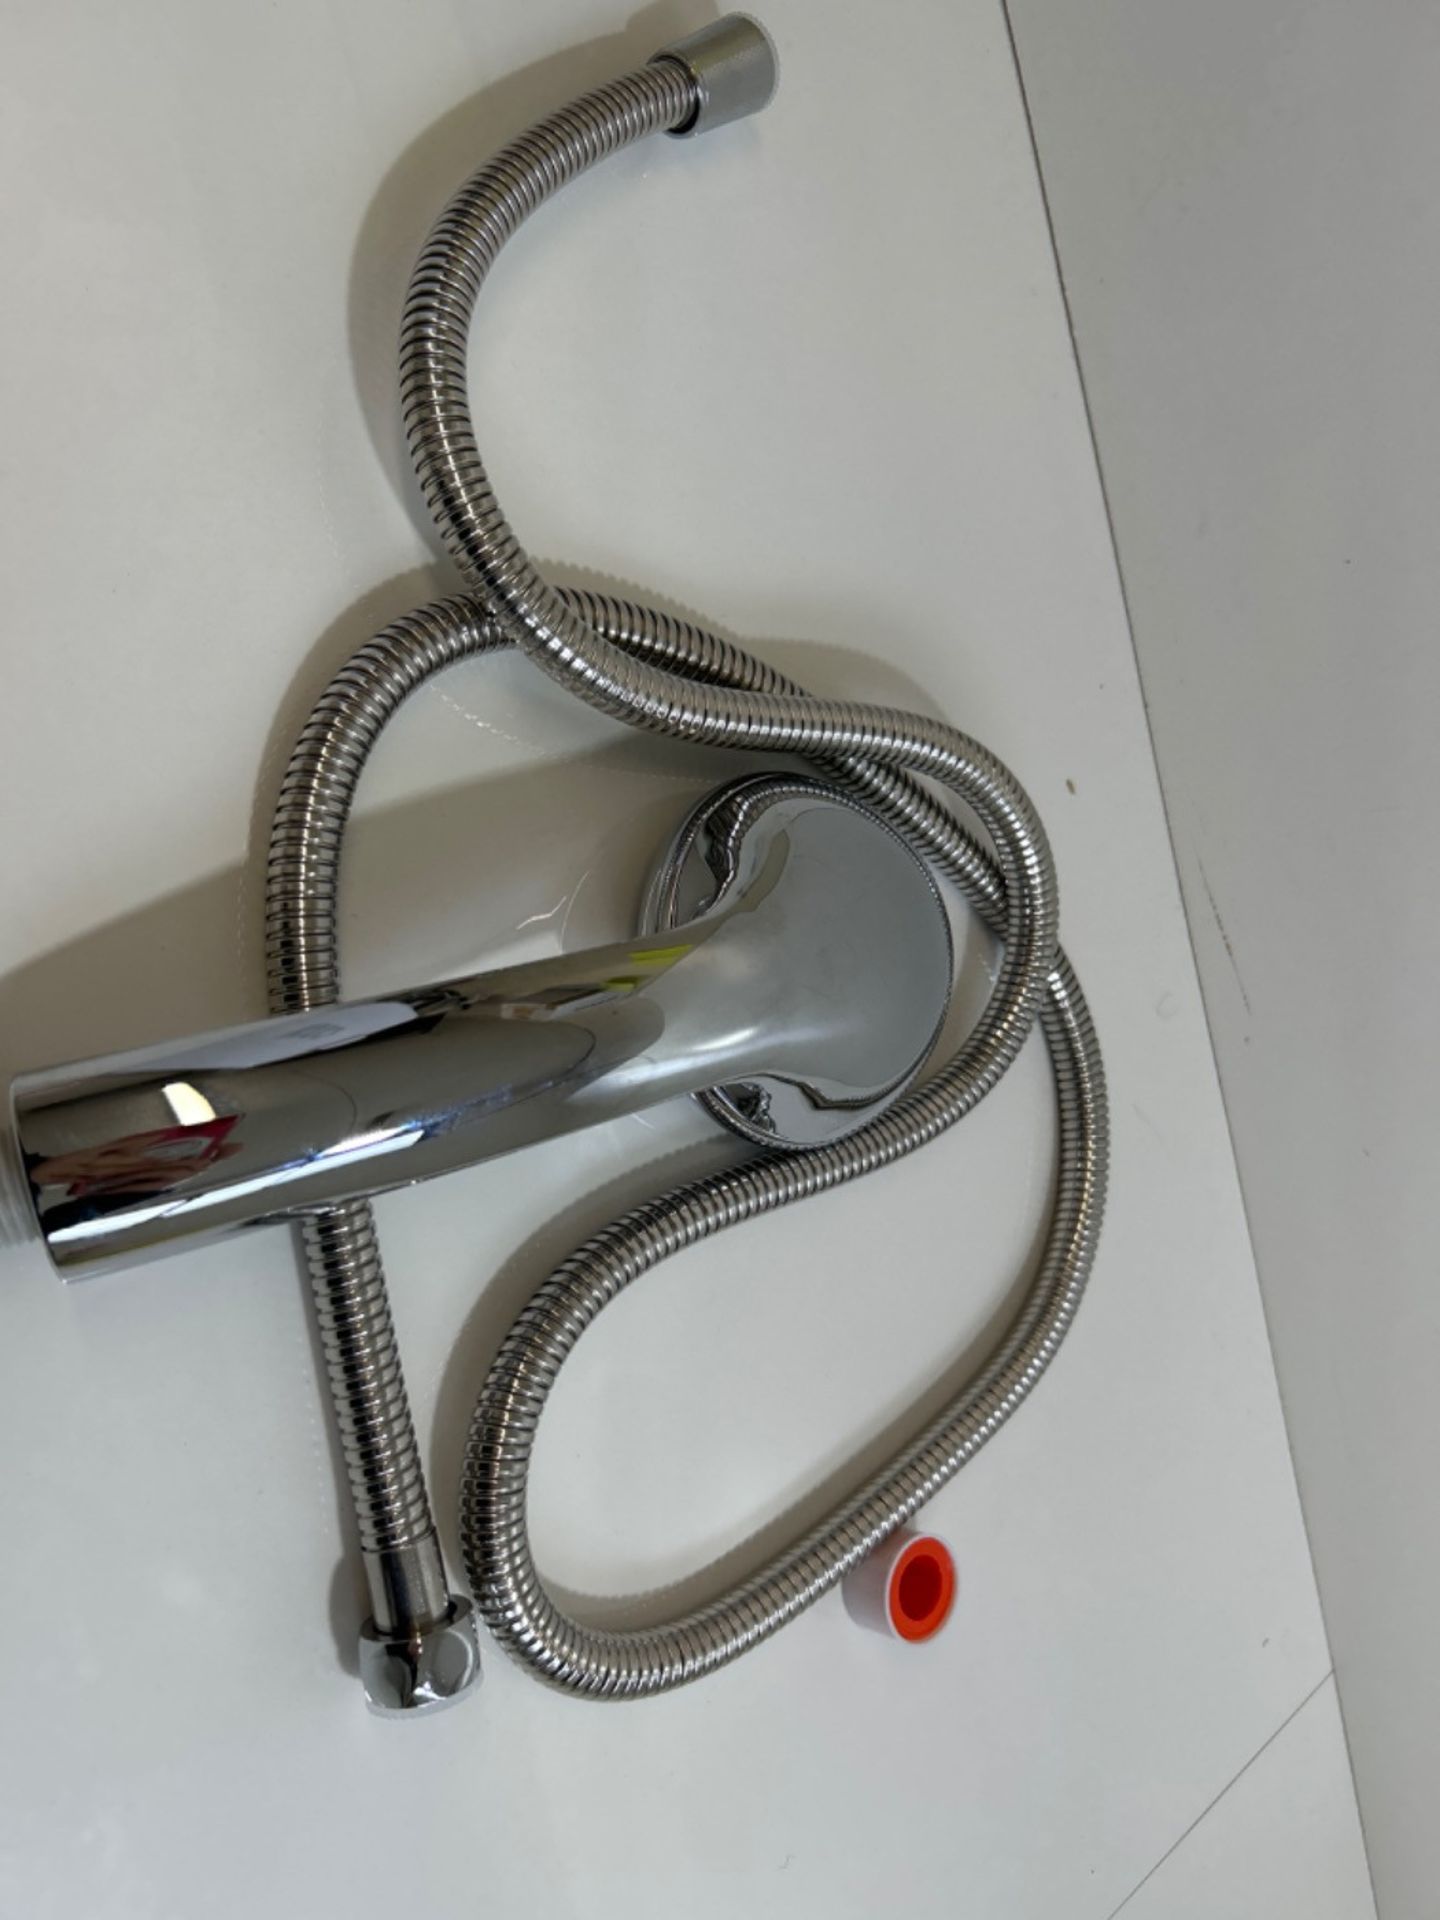 Shower Head,CUCM High Pressure 4 Spray Settings with Hose Adjustable Massage Spa Hand Held Showerhe - Image 3 of 3